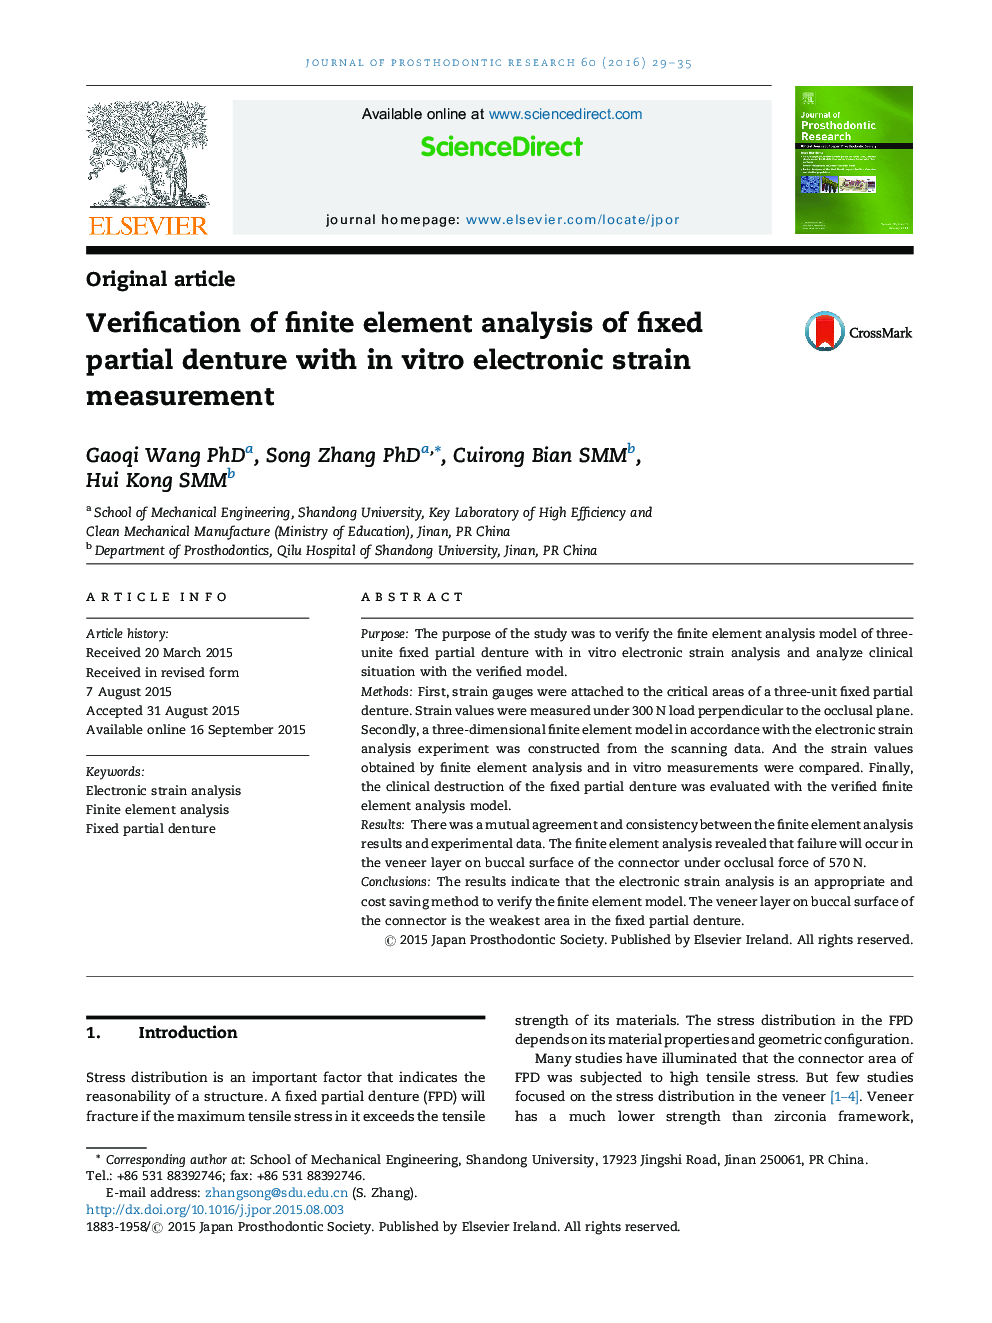 Verification of finite element analysis of fixed partial denture with in vitro electronic strain measurement